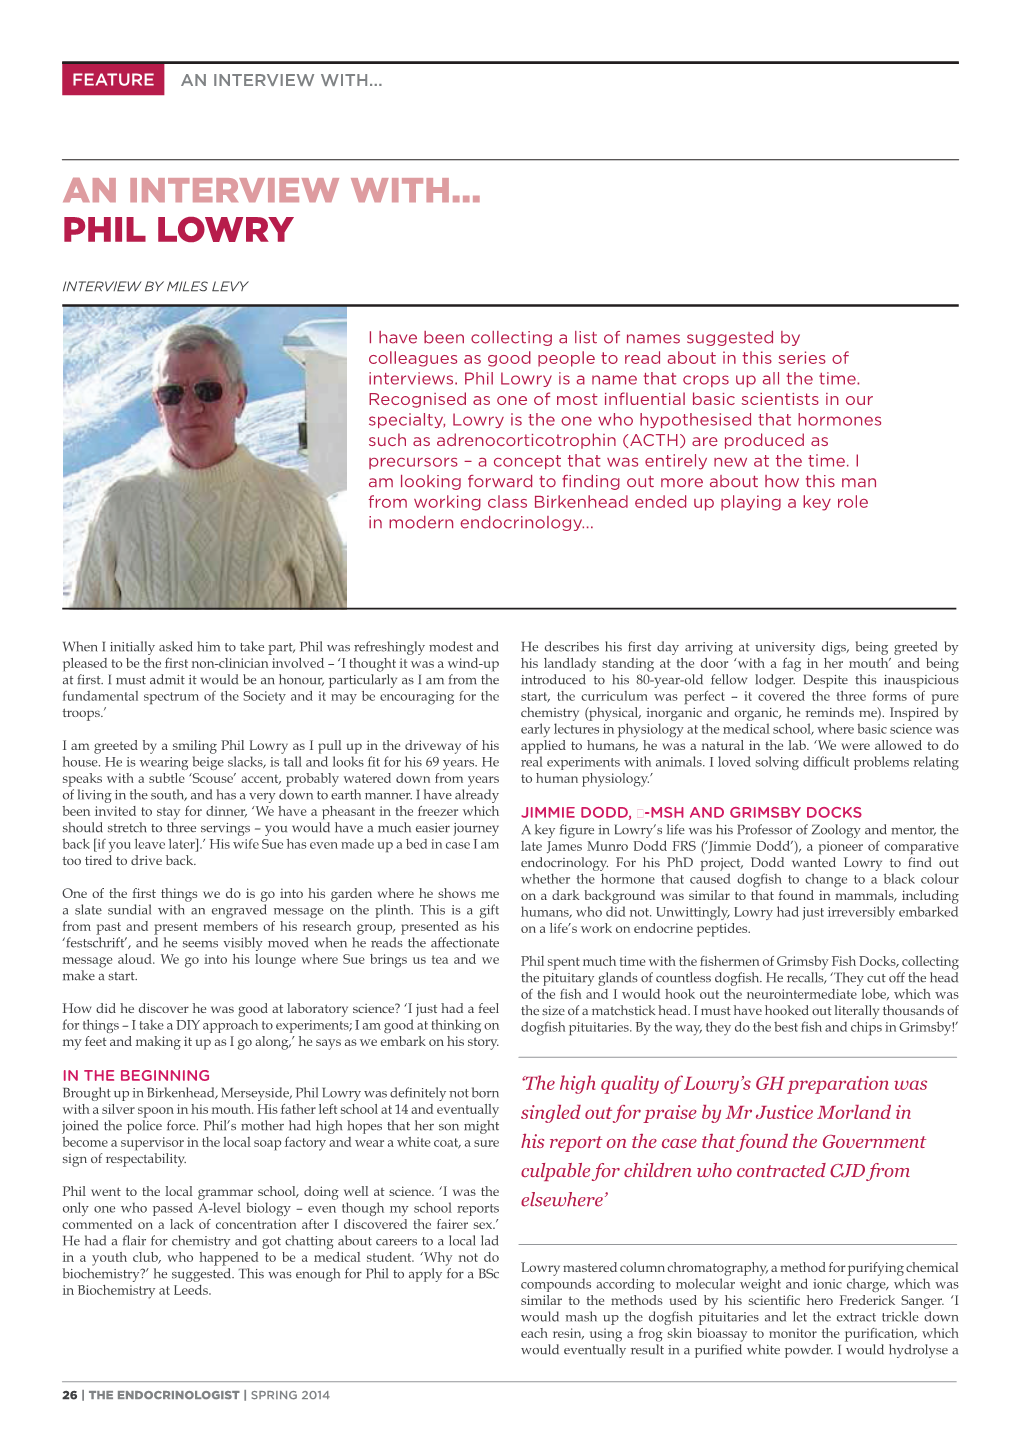 An Interview With... Phil Lowry